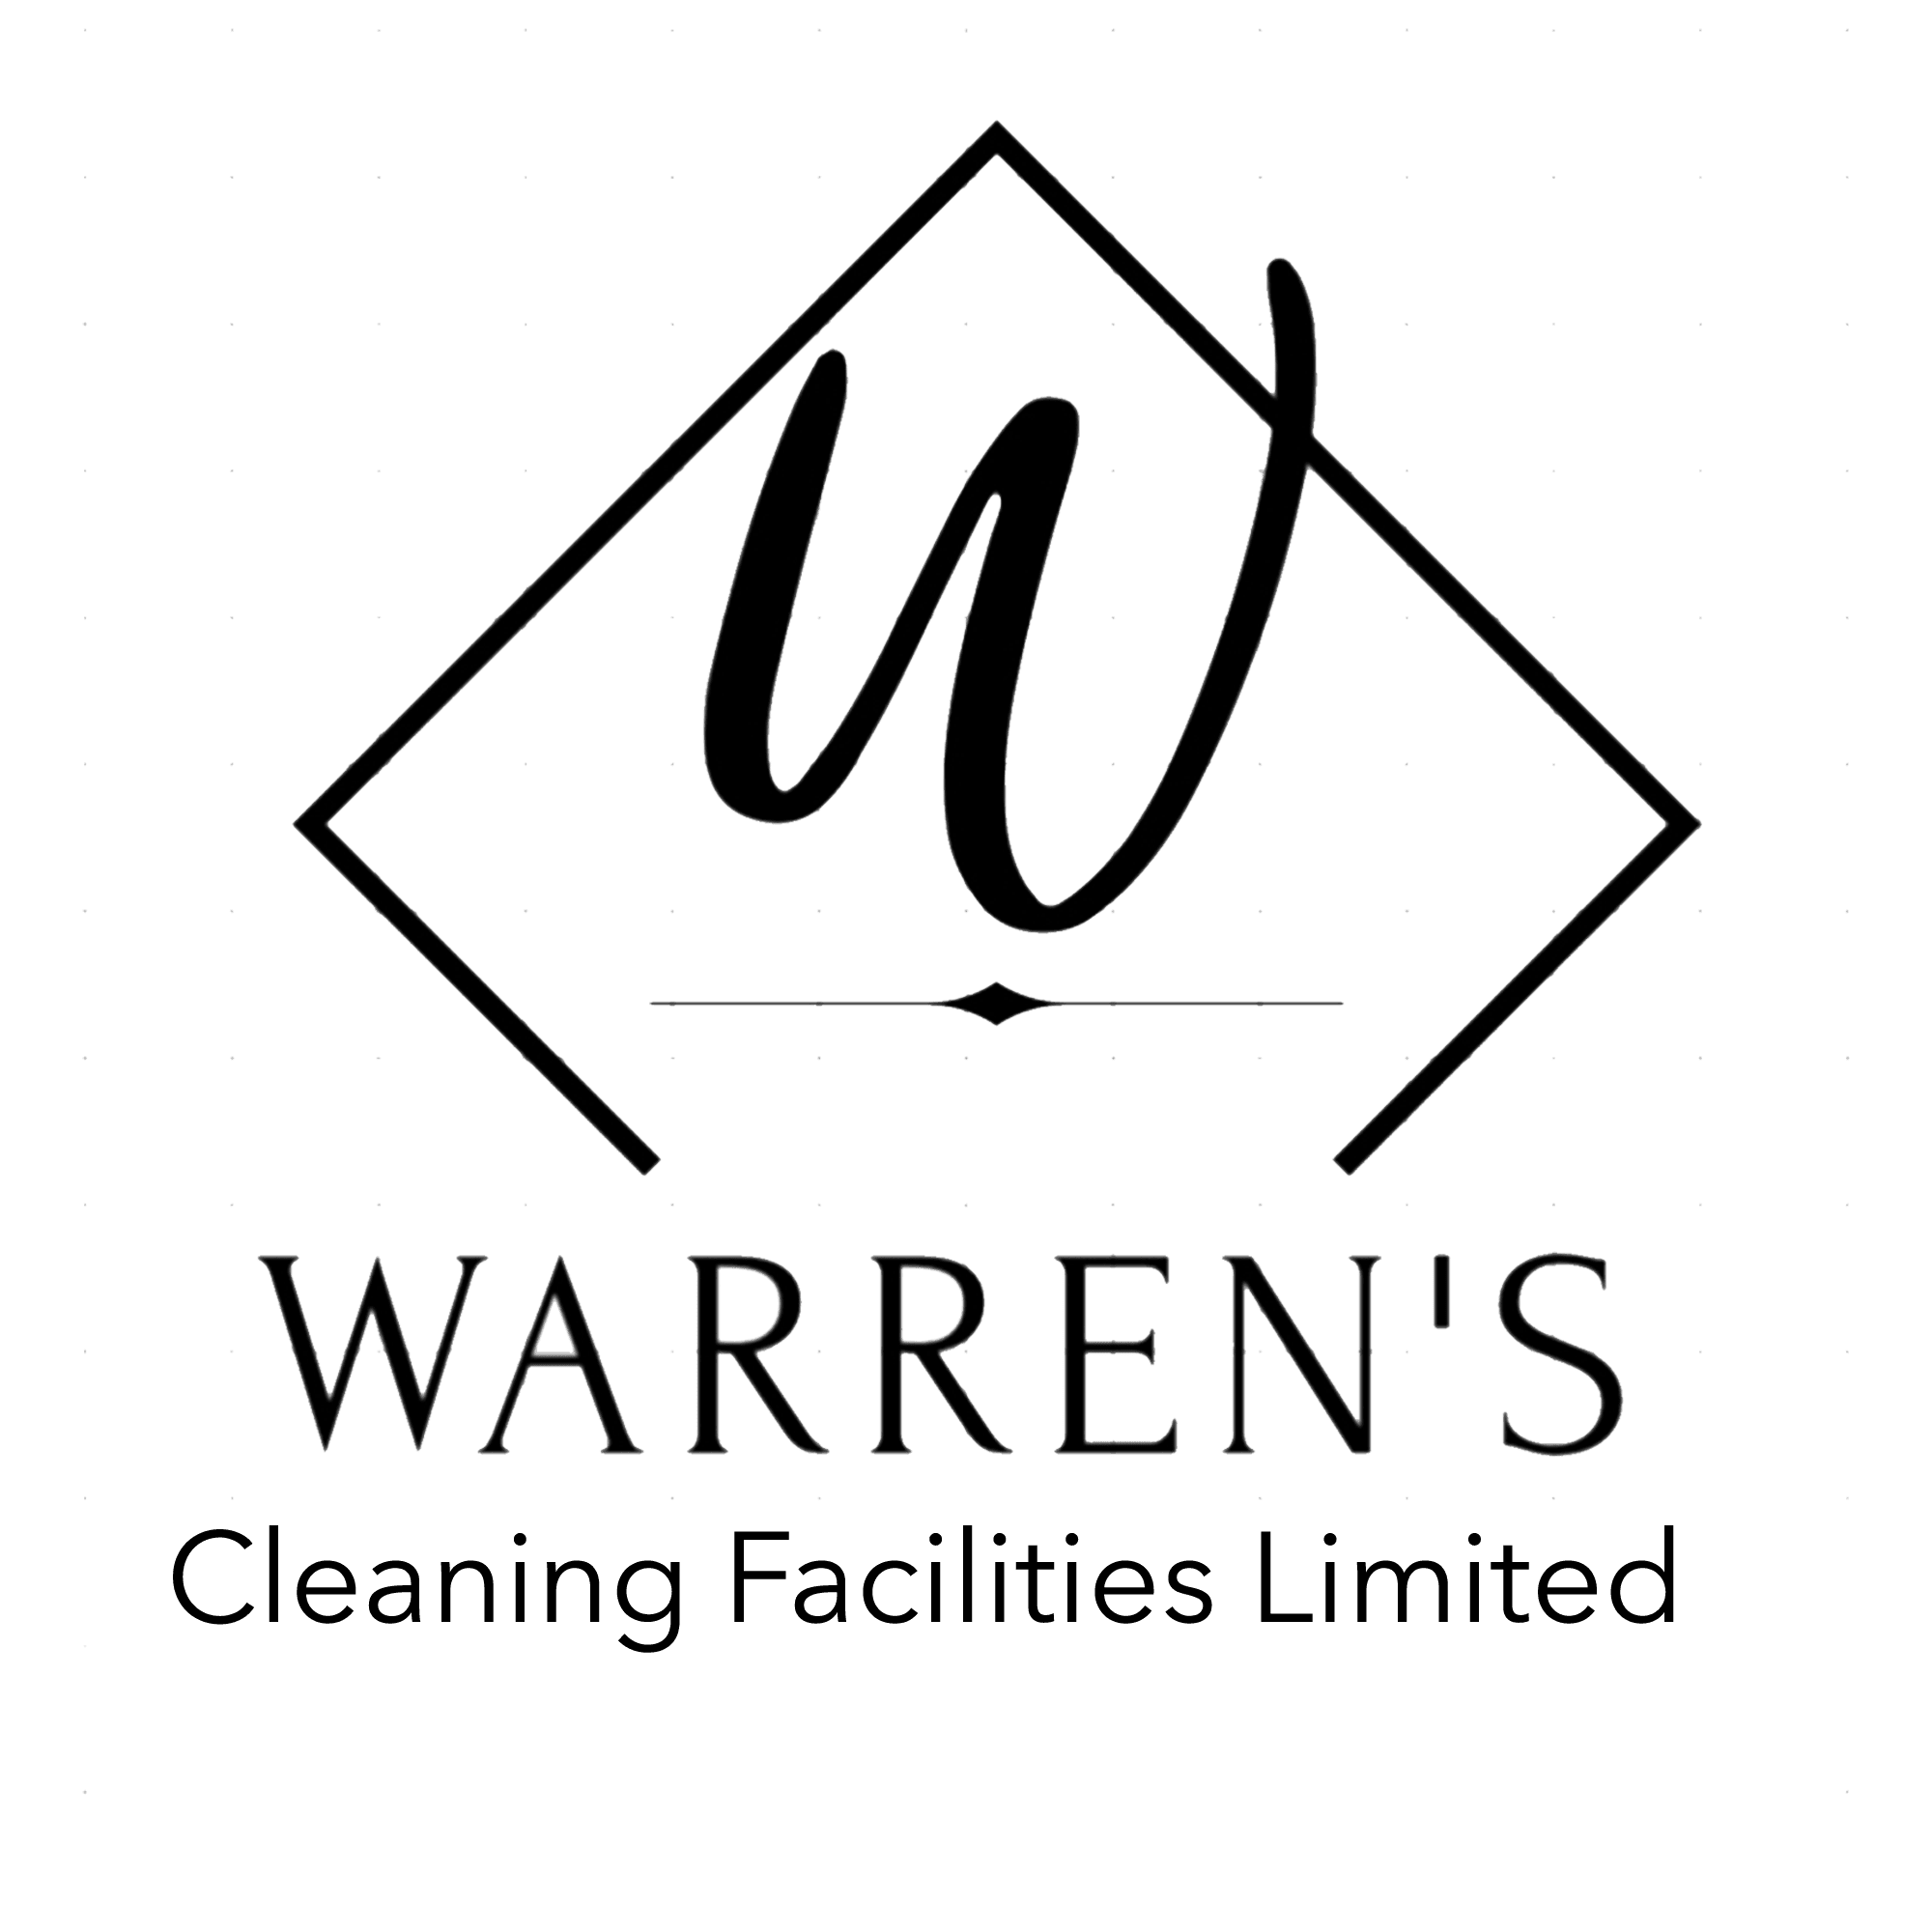 Warren’s Cleaning Facilities Limited